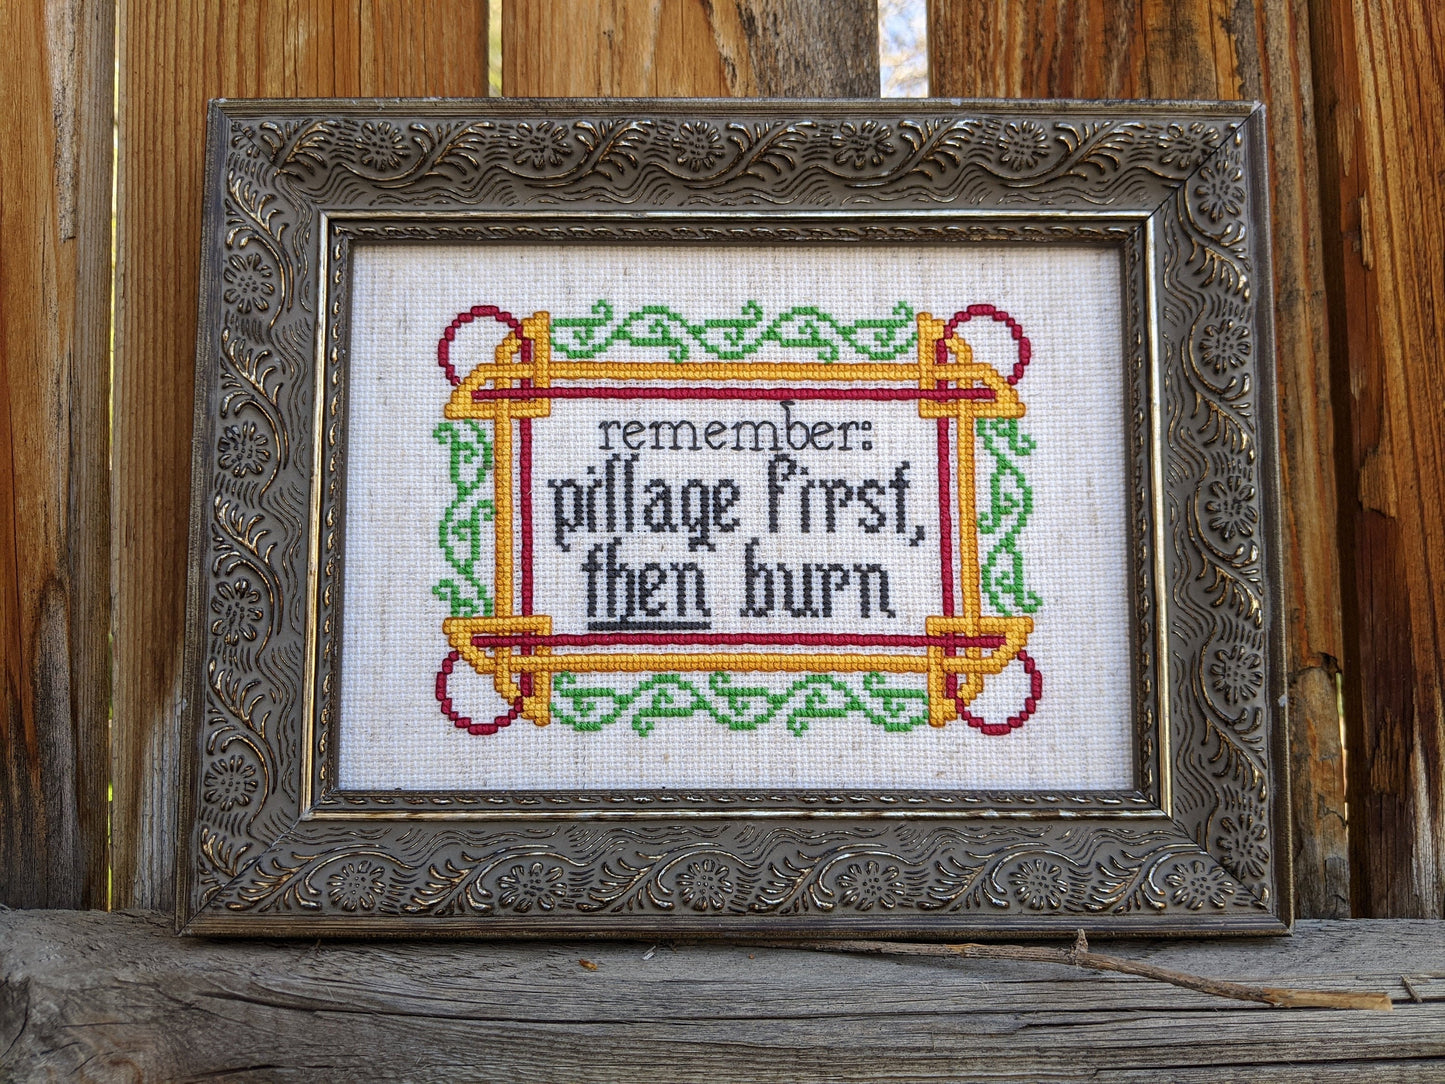 Raider's Creed: "Pillage First, Then Burn" funny subversive cross stitch pattern with Norse/Viking motifs - Instant PDF Download